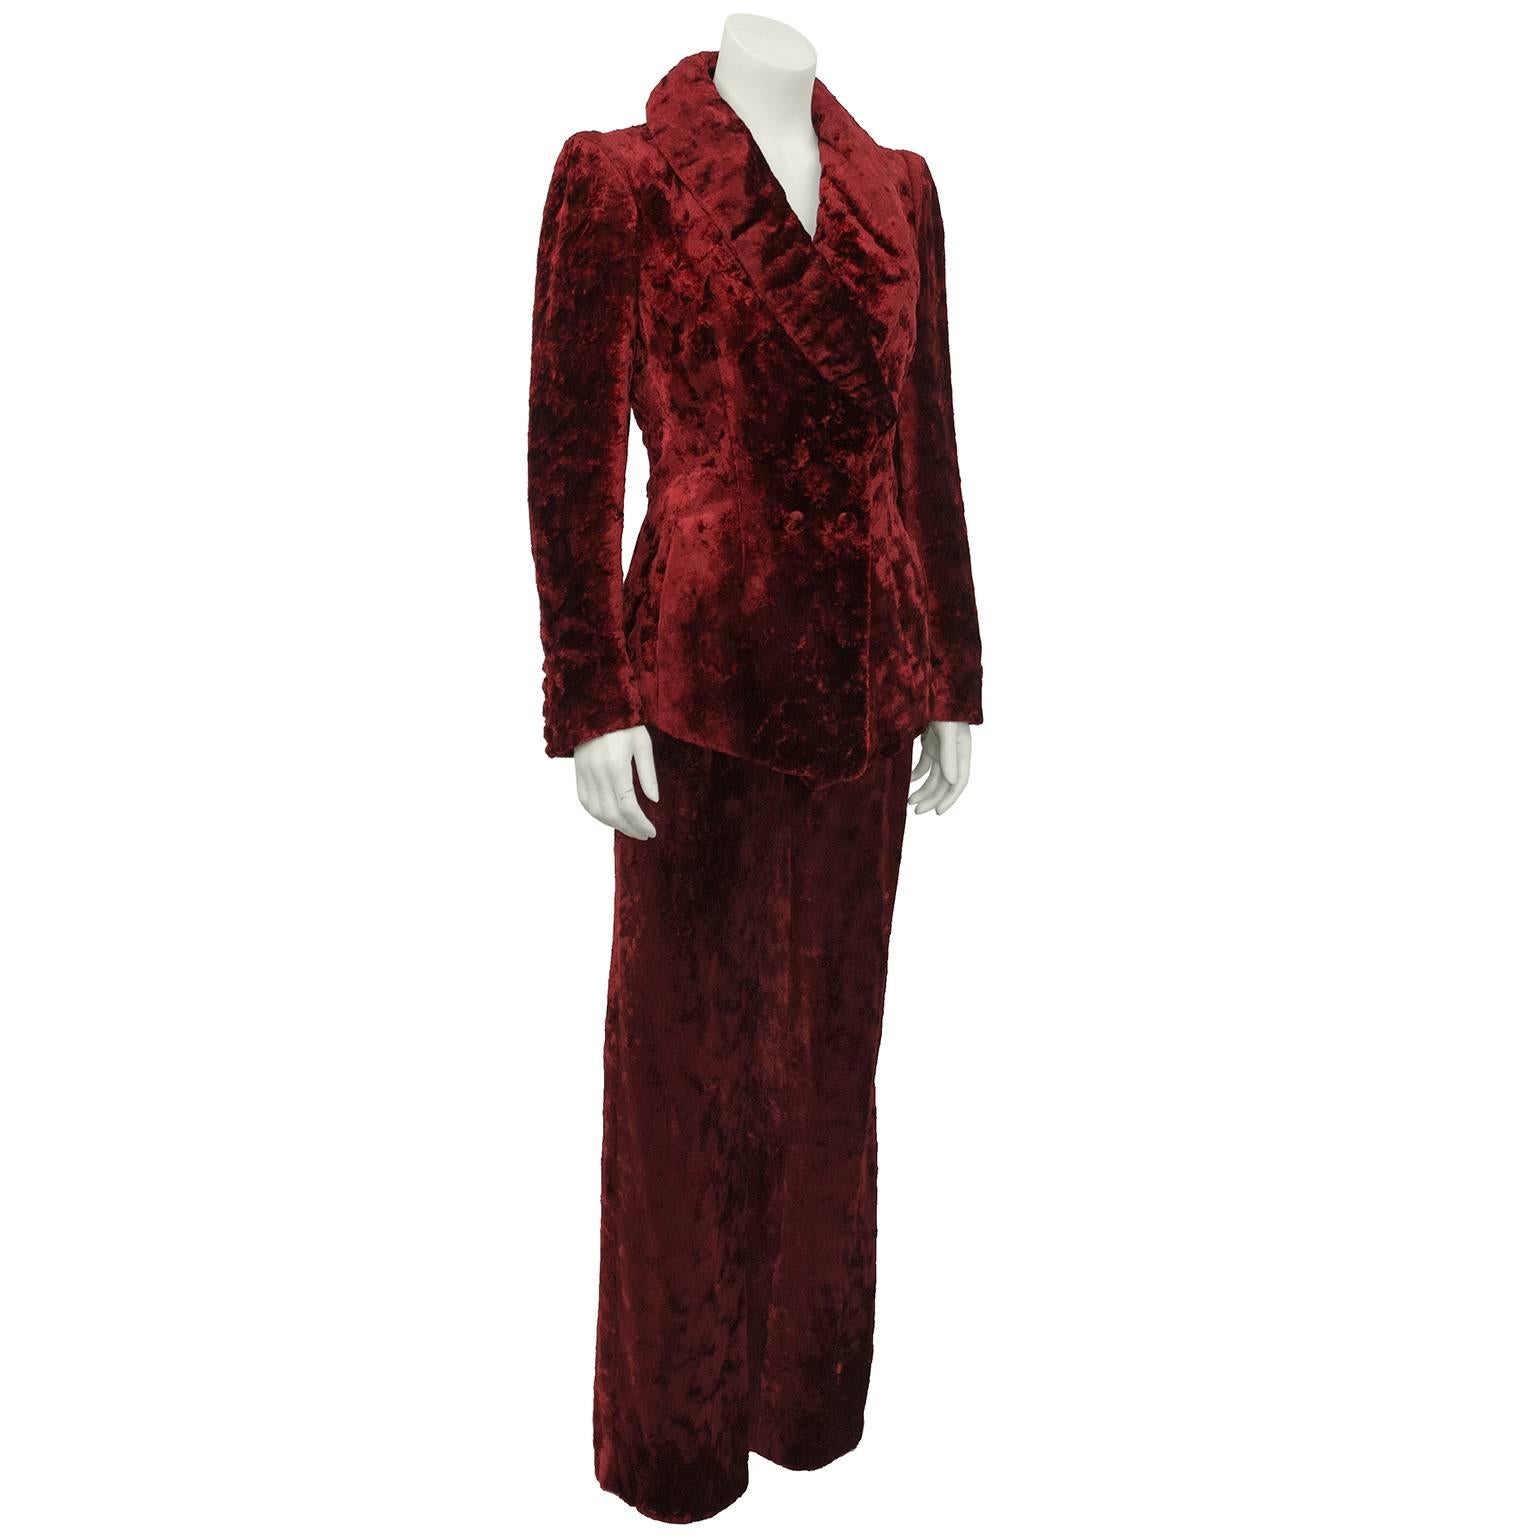 Sonia Rykiel crushed bordeau velvet suit dating from the 1980's. Double breasted jacket with oversized shawl collar. High waisted, straight cut trousers with pleats and belt loops allow option to wear pants with a white t-shirt and a belt. Very